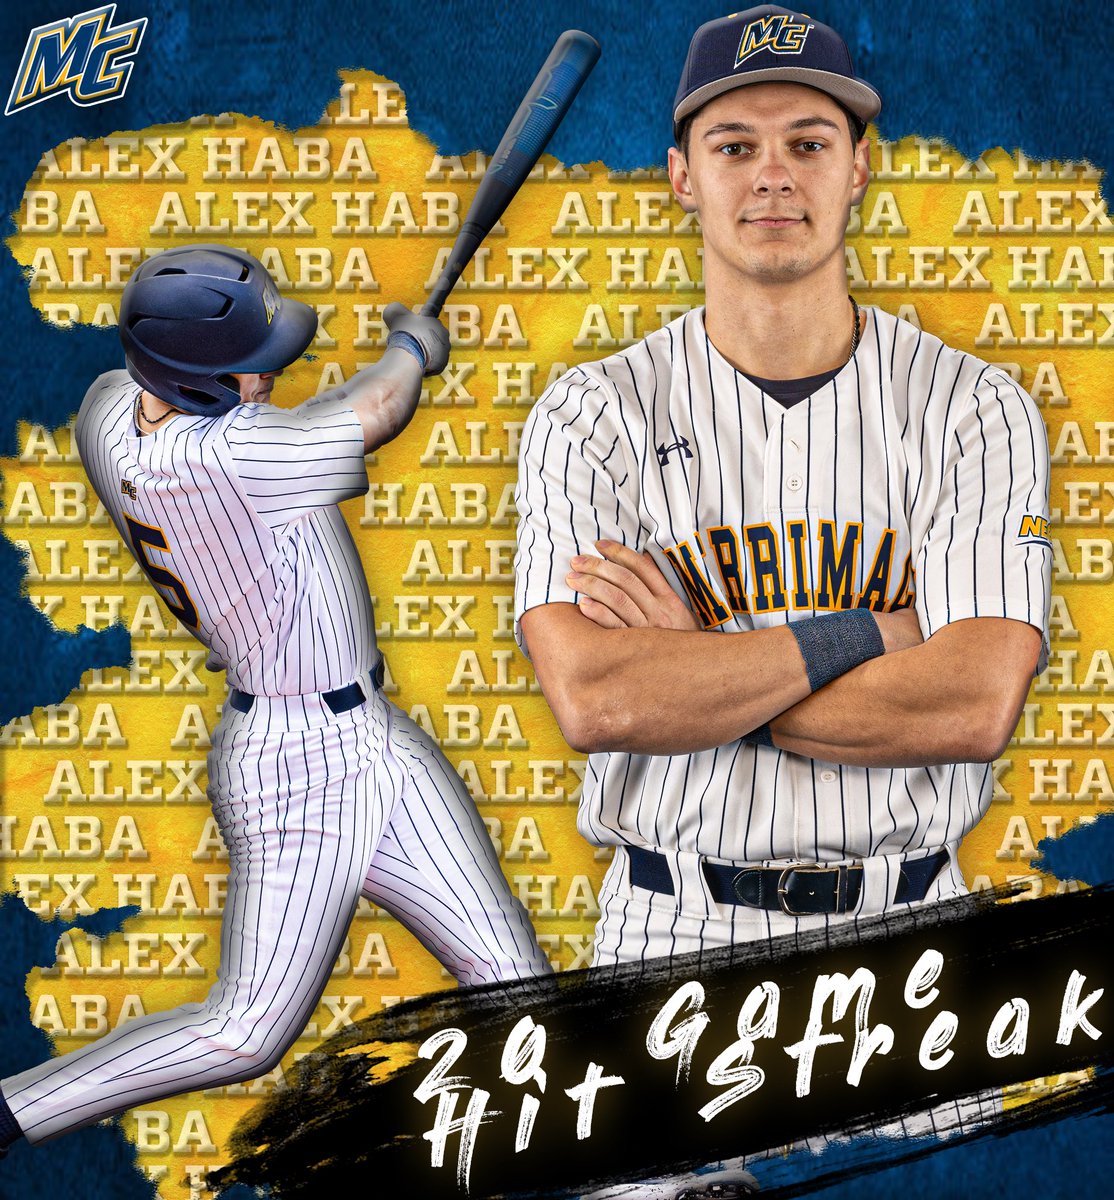 Mr. Merrimack!

With a double in the third of inning of today’s game, Alex Haba has now extended his hit streak to 20 games!

Congrats Alex!

#GoMack